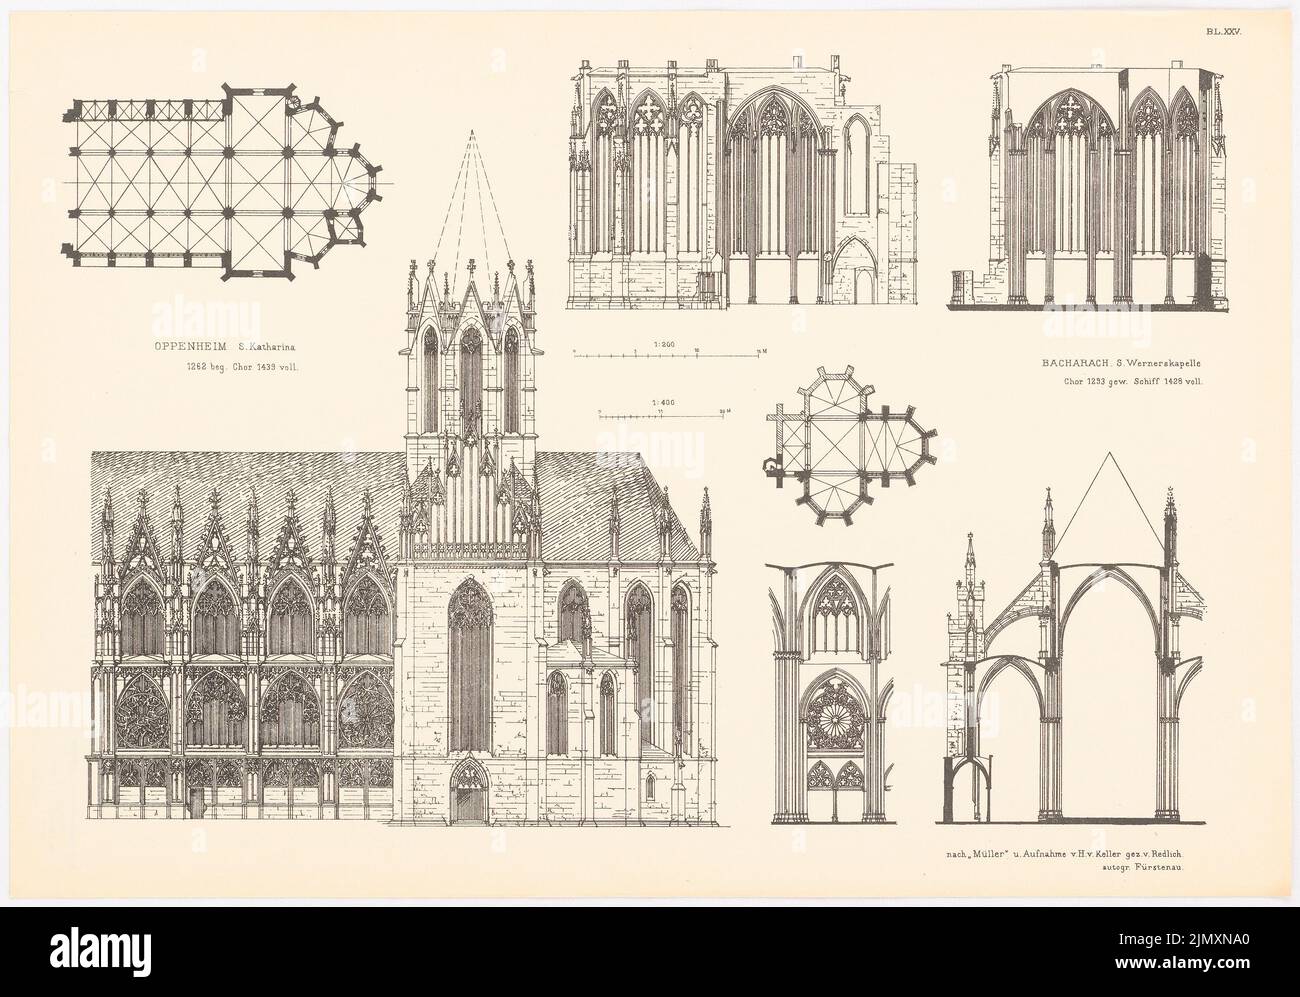 N.N., S. Katharina in Oppenheim. St. Wernerskapelle in Bacharach. (From: Gothic architecture in Germany, ed. V. Character output. D. Stud. TH Berlin, 187 (1875-1875): floor plan, view, interior views Oppenheim, cross-section, floor plan, detail bacharach. Pressure on paper, 36, 8 x 52.7 cm (including scan edges) Stock Photo